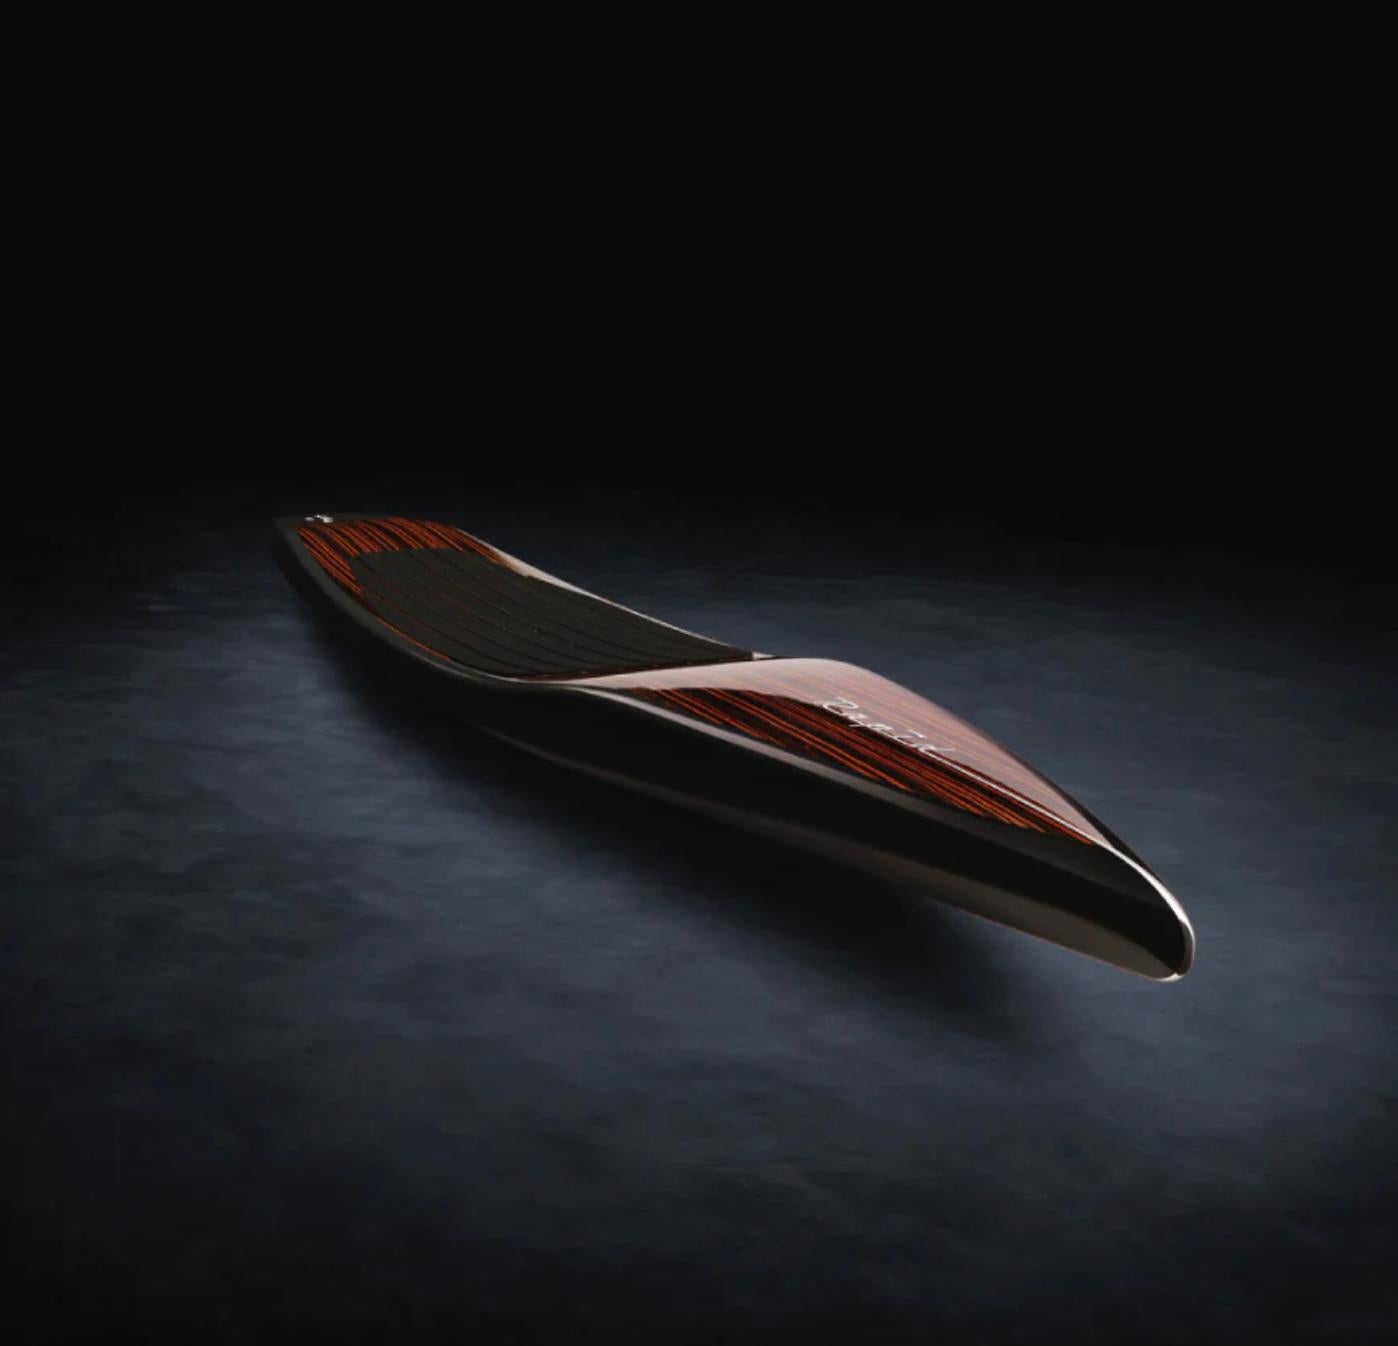 The world's most beautiful paddle boards by Beau Lake. 

Designed and built in Canada, The Rapid paddle board is a touring style paddleboard. Its long, narrow body is built entirely of carbon fiber to create a lightweight, ultra-durable paddleboard